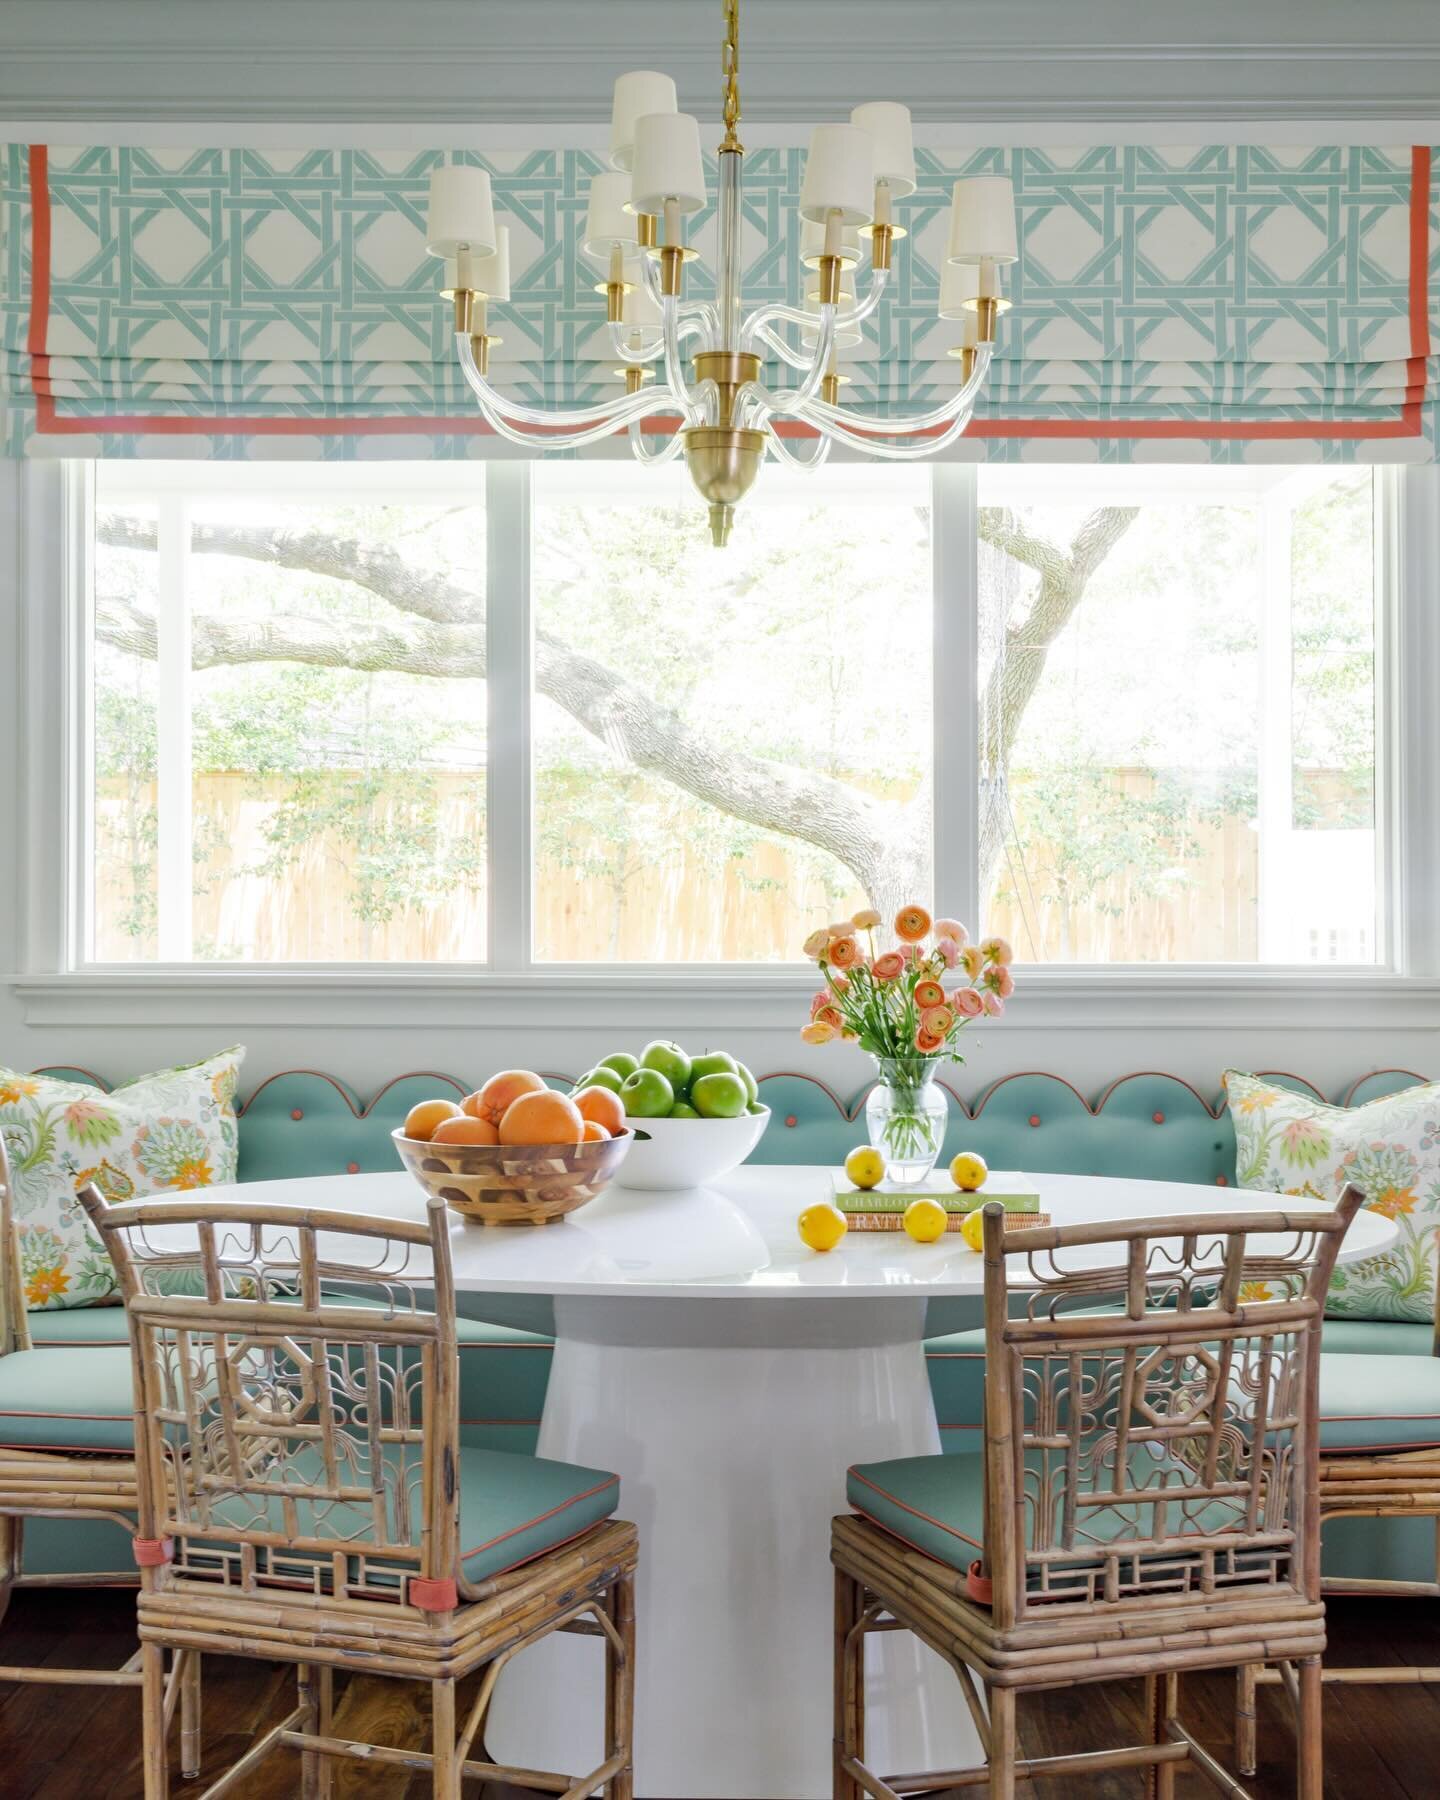 When it feels like the 100th day of January I start day dreaming of spring sunshine and happy florals! ☀️🌷 #lilamaloneinteriors #breakfasttable #houstoninteriordesign #rachelmanningphotography #raoultextiles #visualcomfort #carletonvltd #banquettese